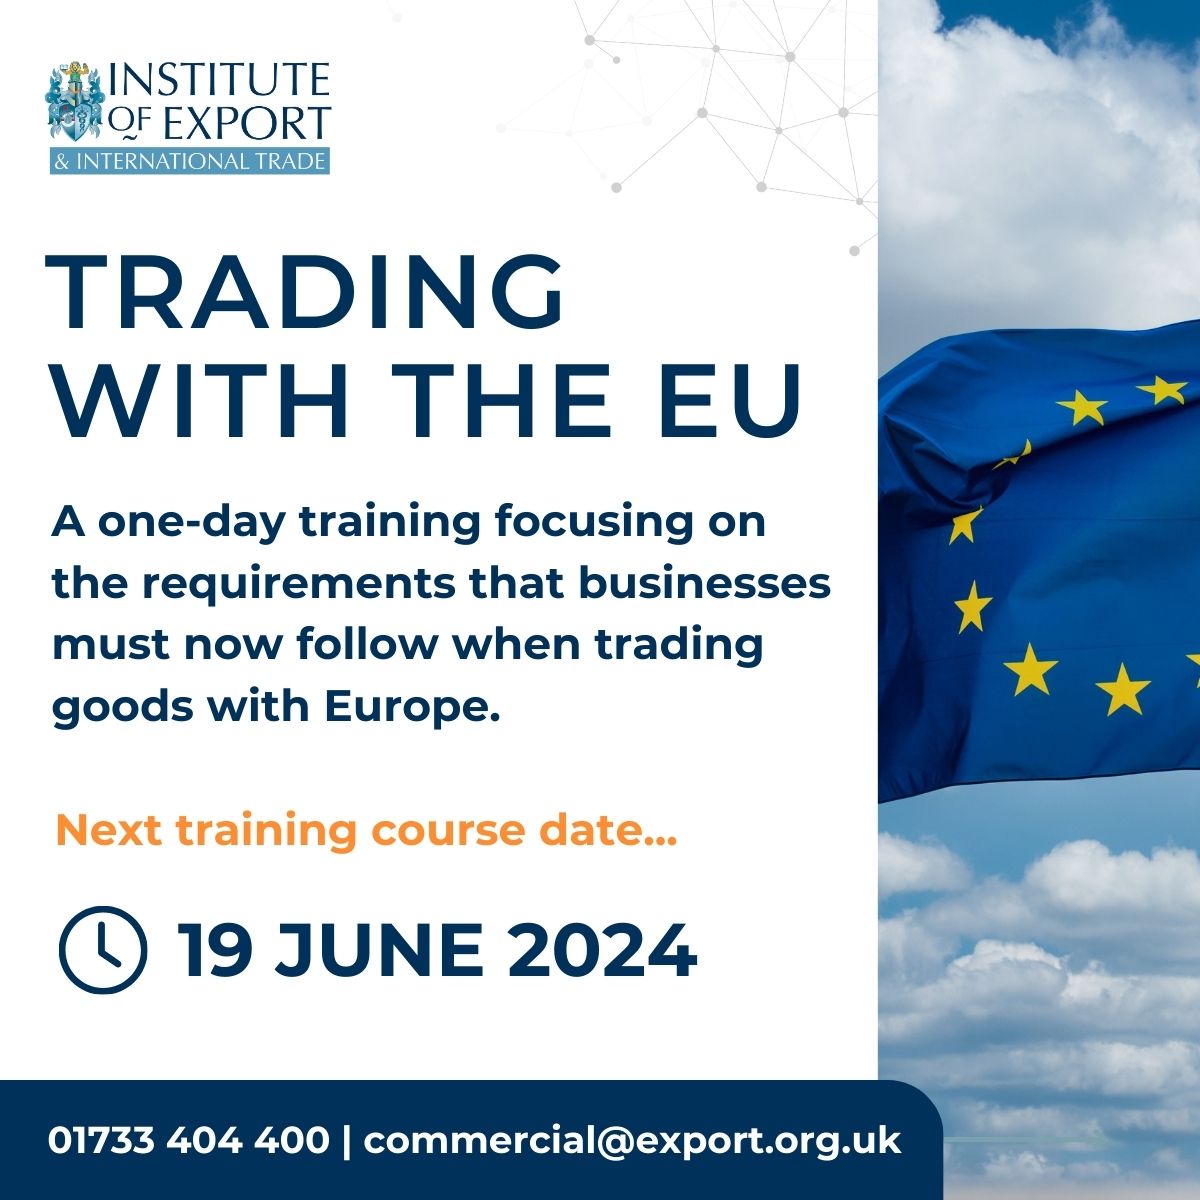 Our 'Trading with the EU' #training course equips #UK businesses with the knowledge to continue trading successfully and compliantly with the #EU in a period of ongoing change. Sign up for the course 👉ow.ly/mGJY50ROP8v